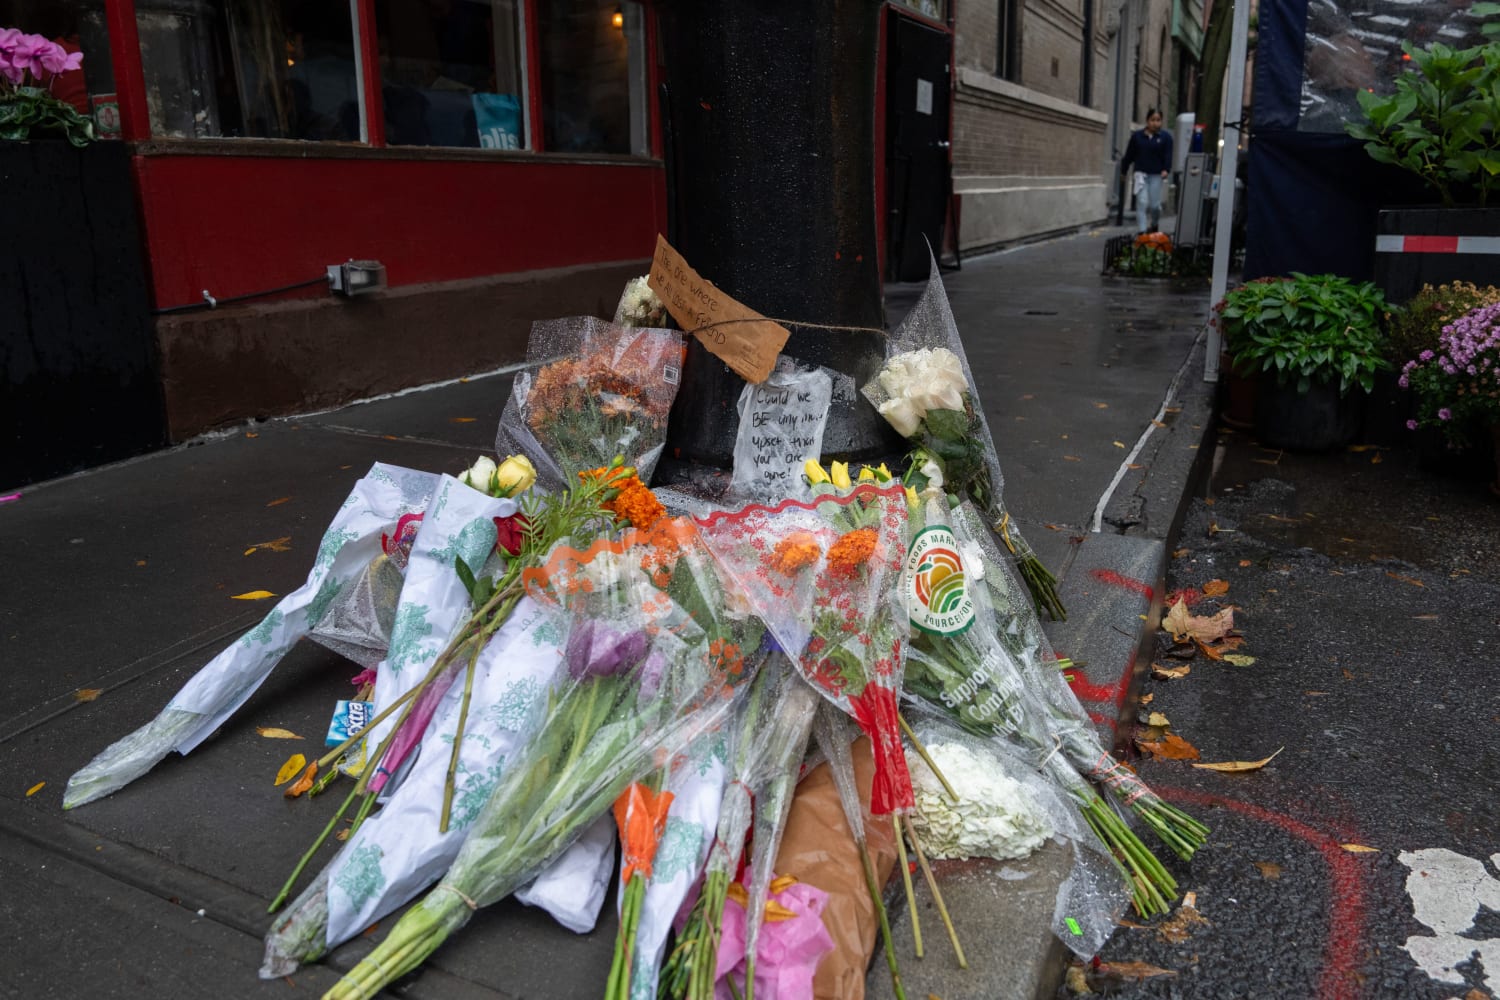 Matthew Perry memorial outside NYC Friends apartment grows as fans leave  flowers and heartfelt tributes to late star following his shock death aged  54